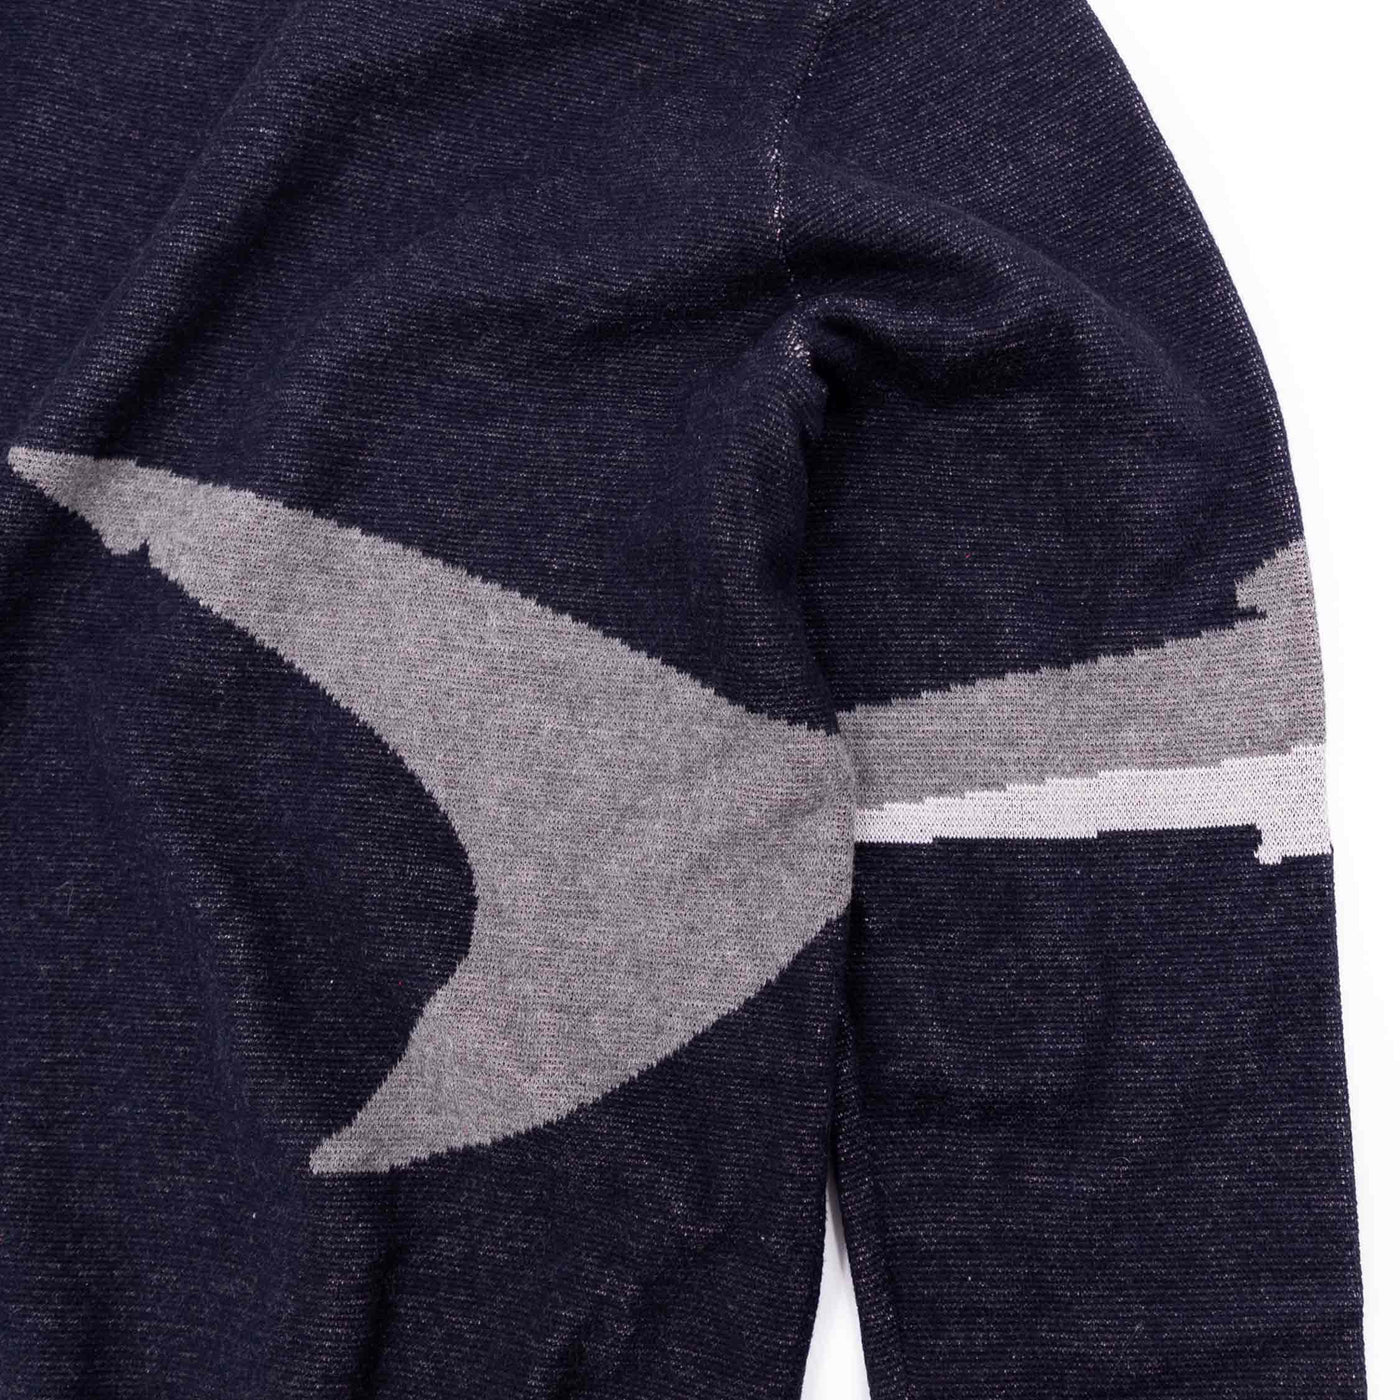 OCEARCH White Shark Jacquard Knit Sweater Blue